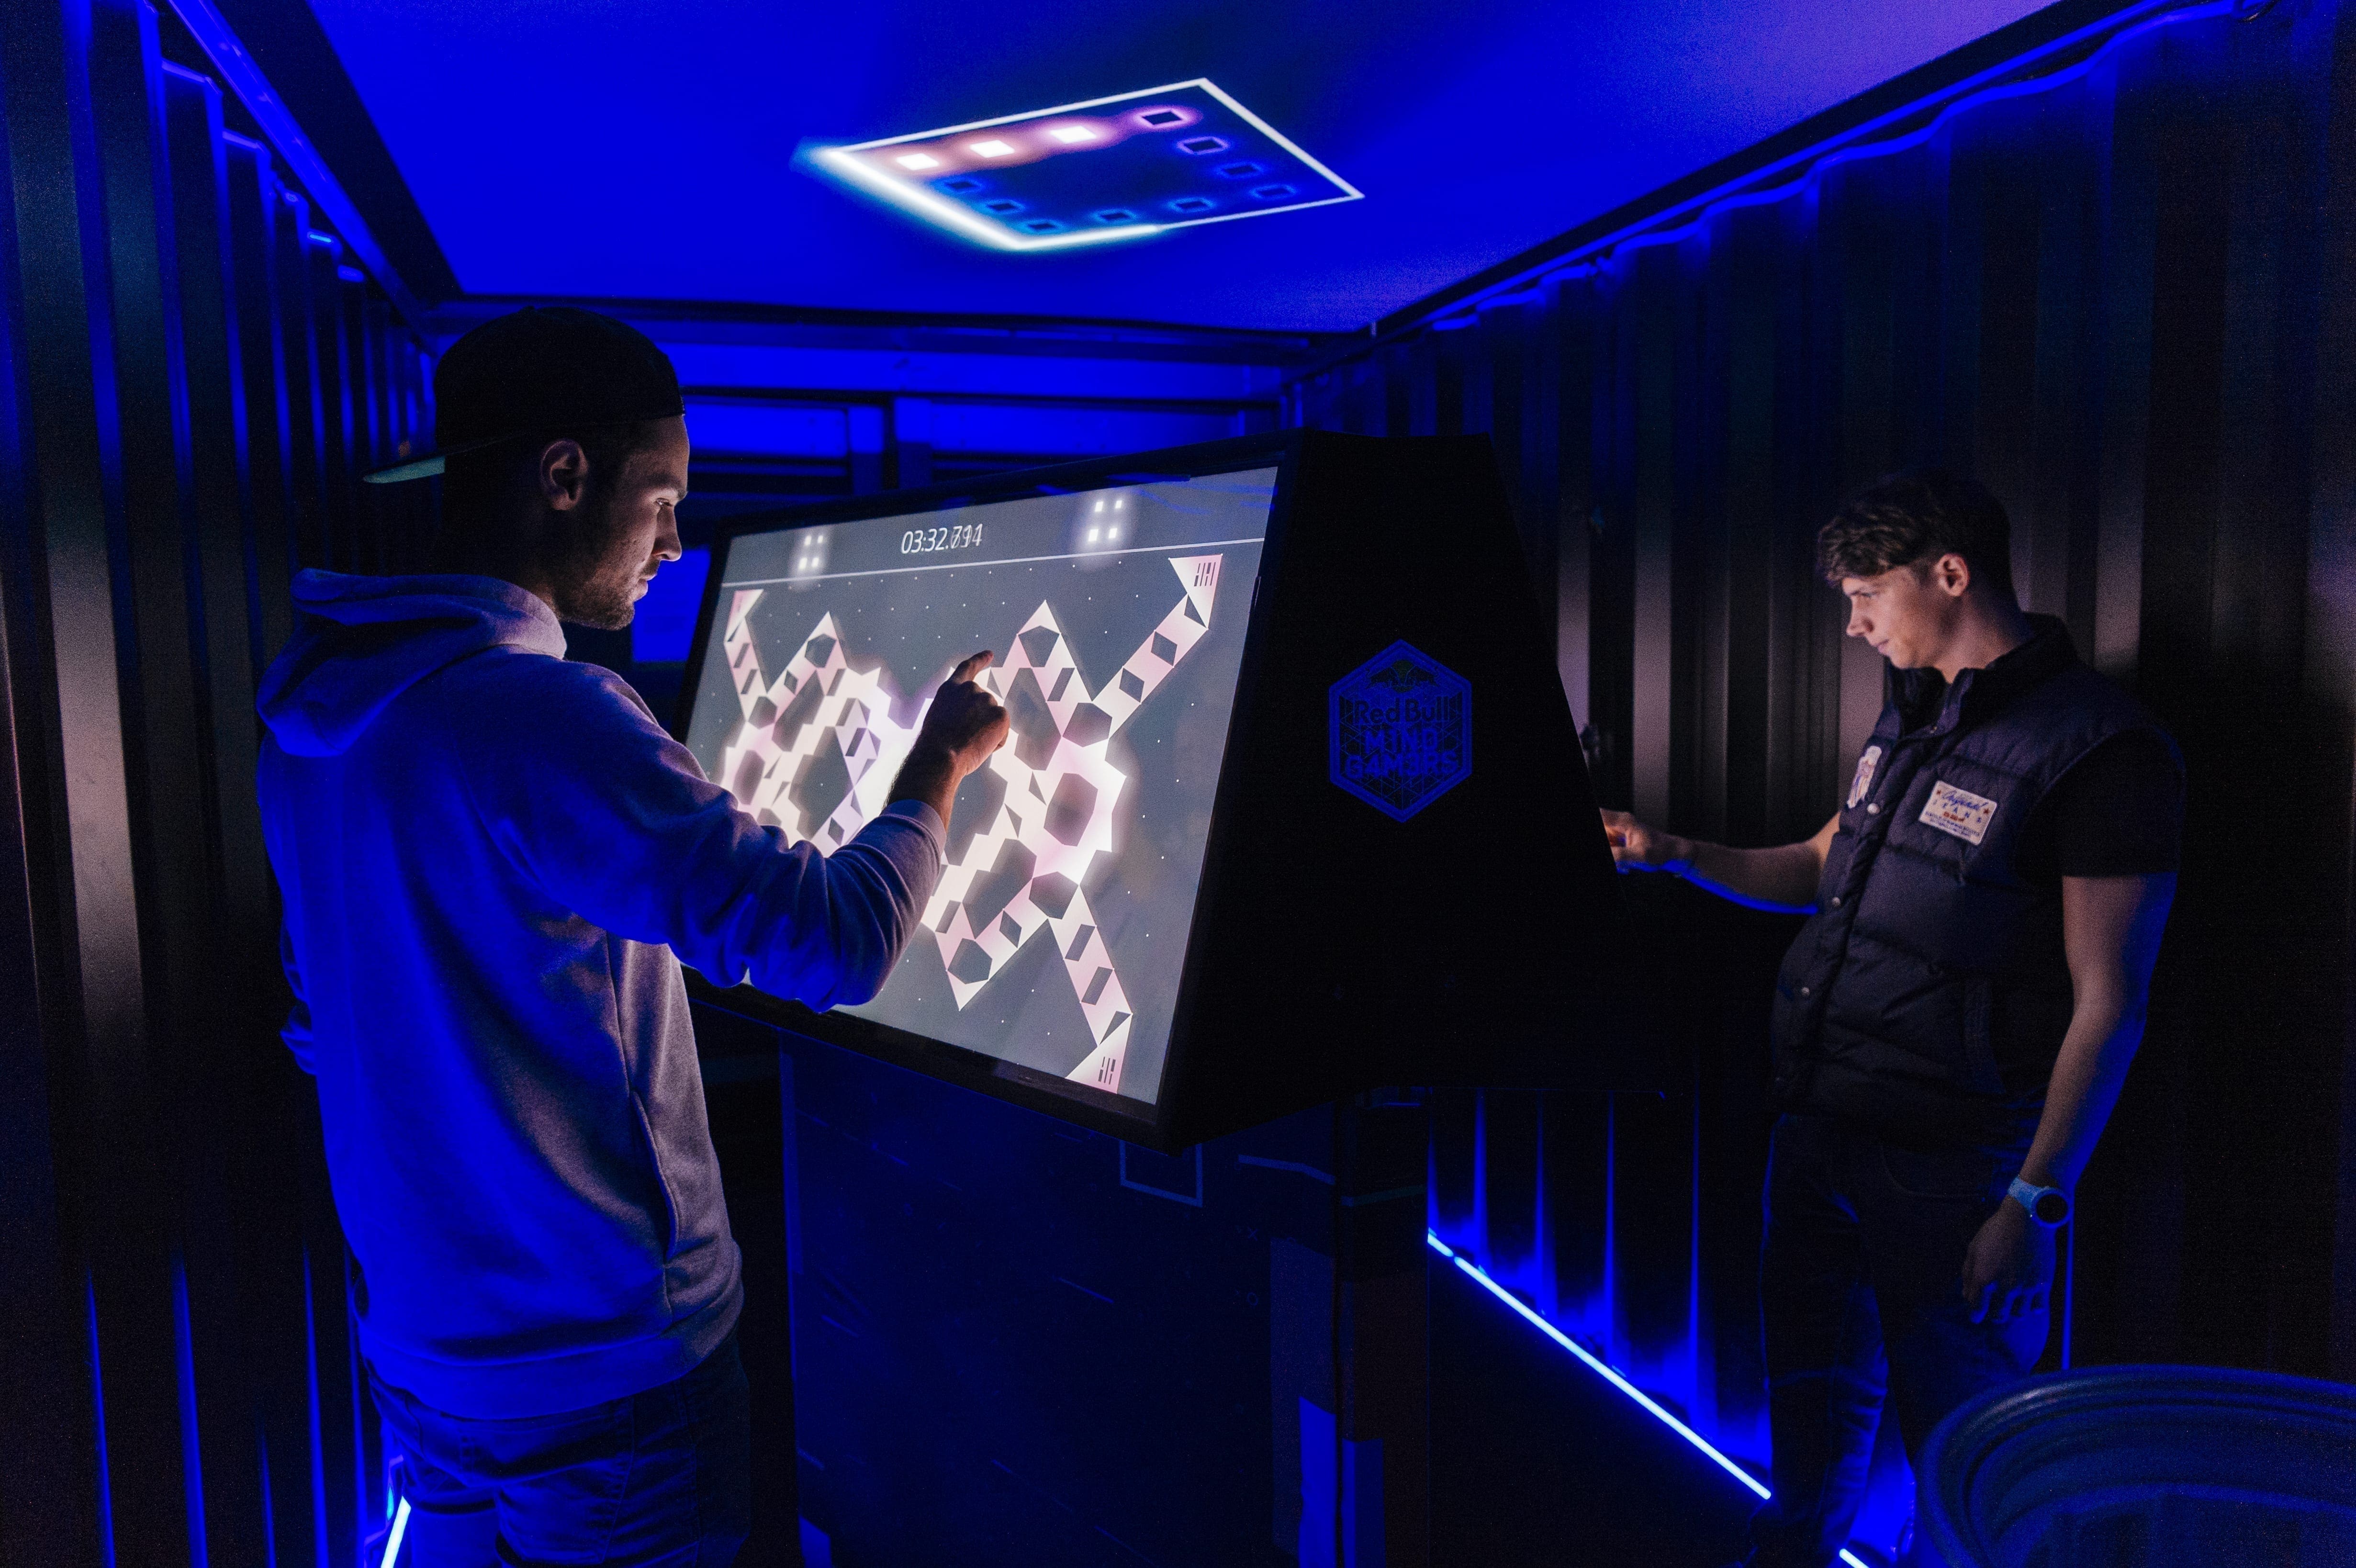 Competitors at the Red Bull Escape Room World Championship Qualifier 2018 Vienna, Austria on October 19th, 2018